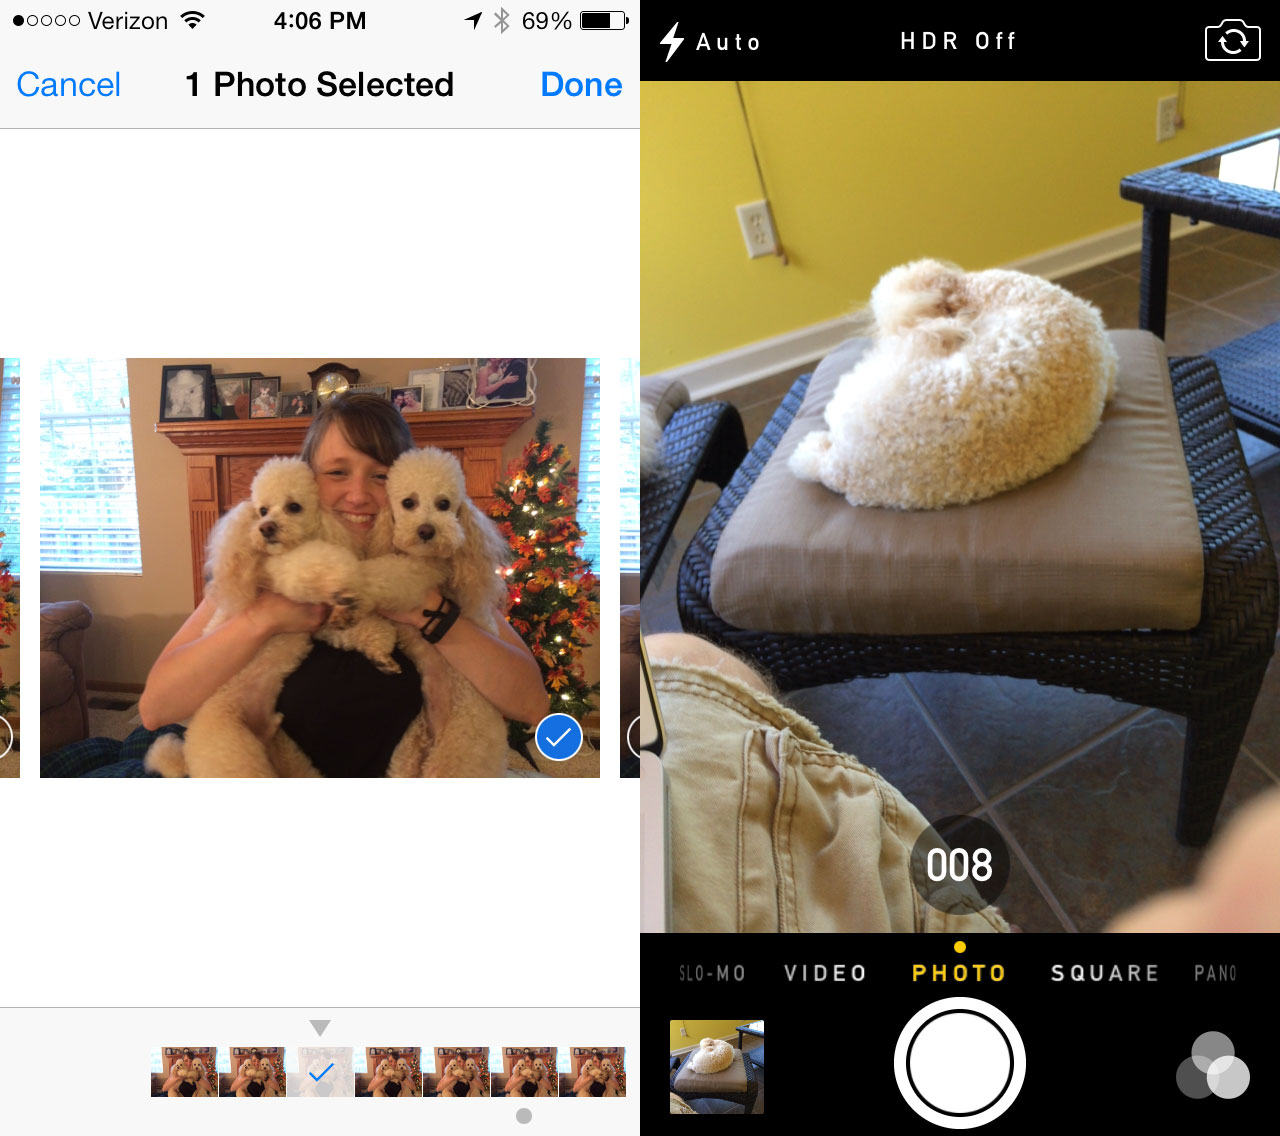 Take 10 photos per second with the iPhone 5s.